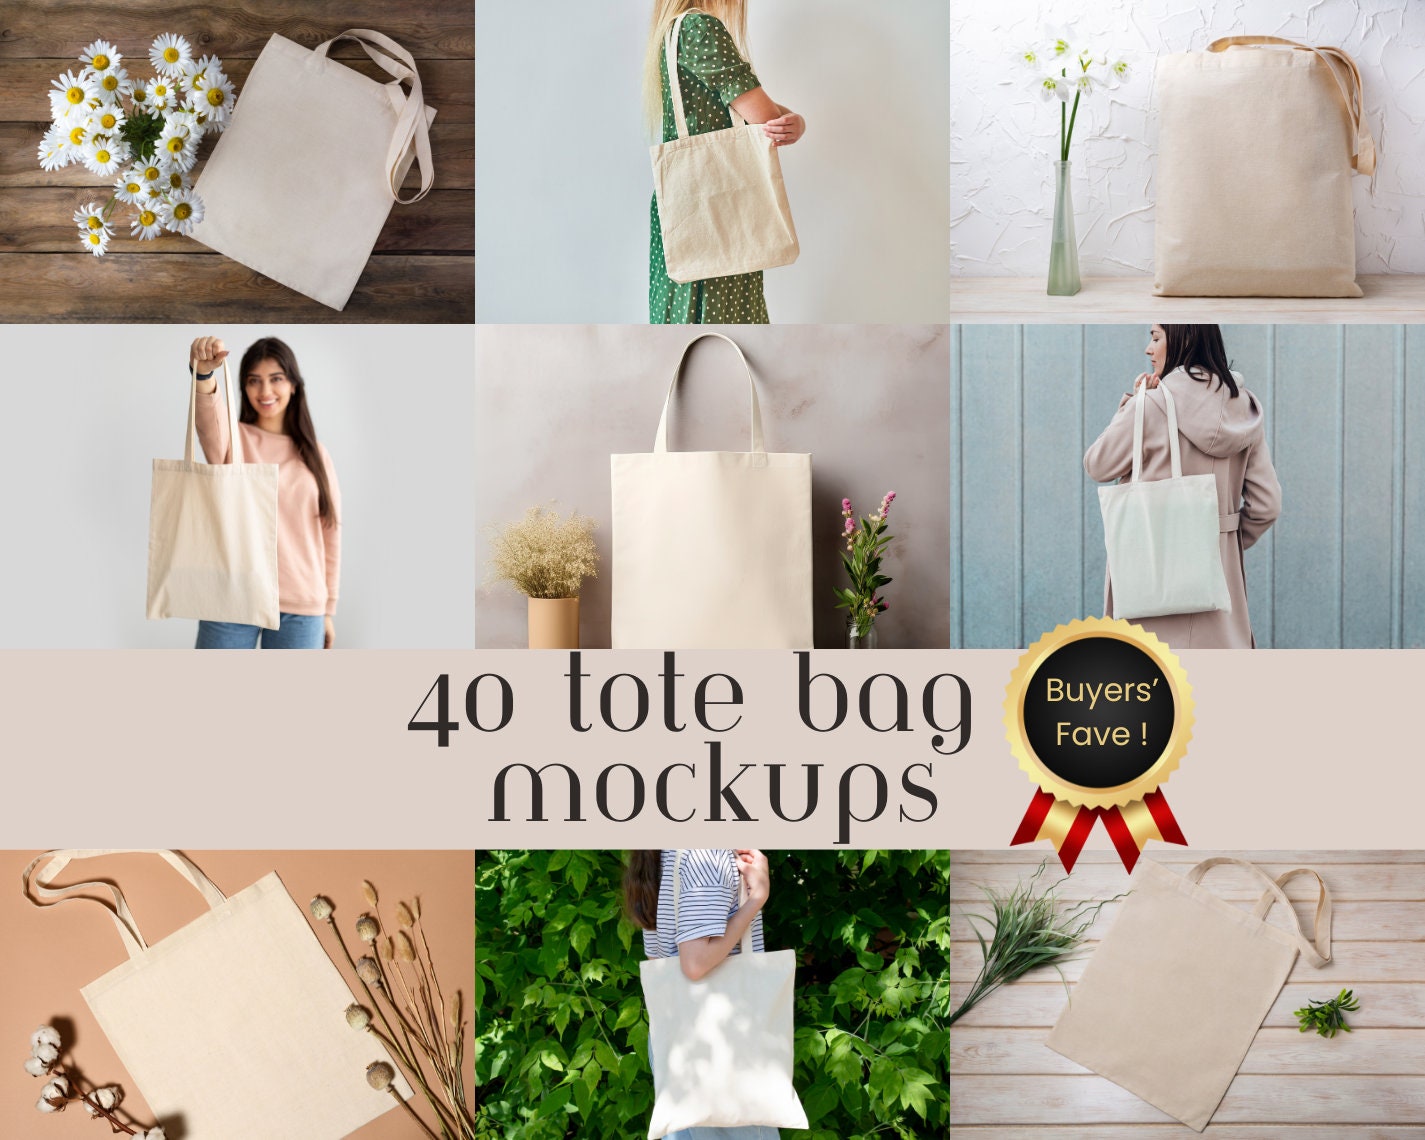 Blank Canvas Tote Bag Design Mockup With Hand Handmade Shopping